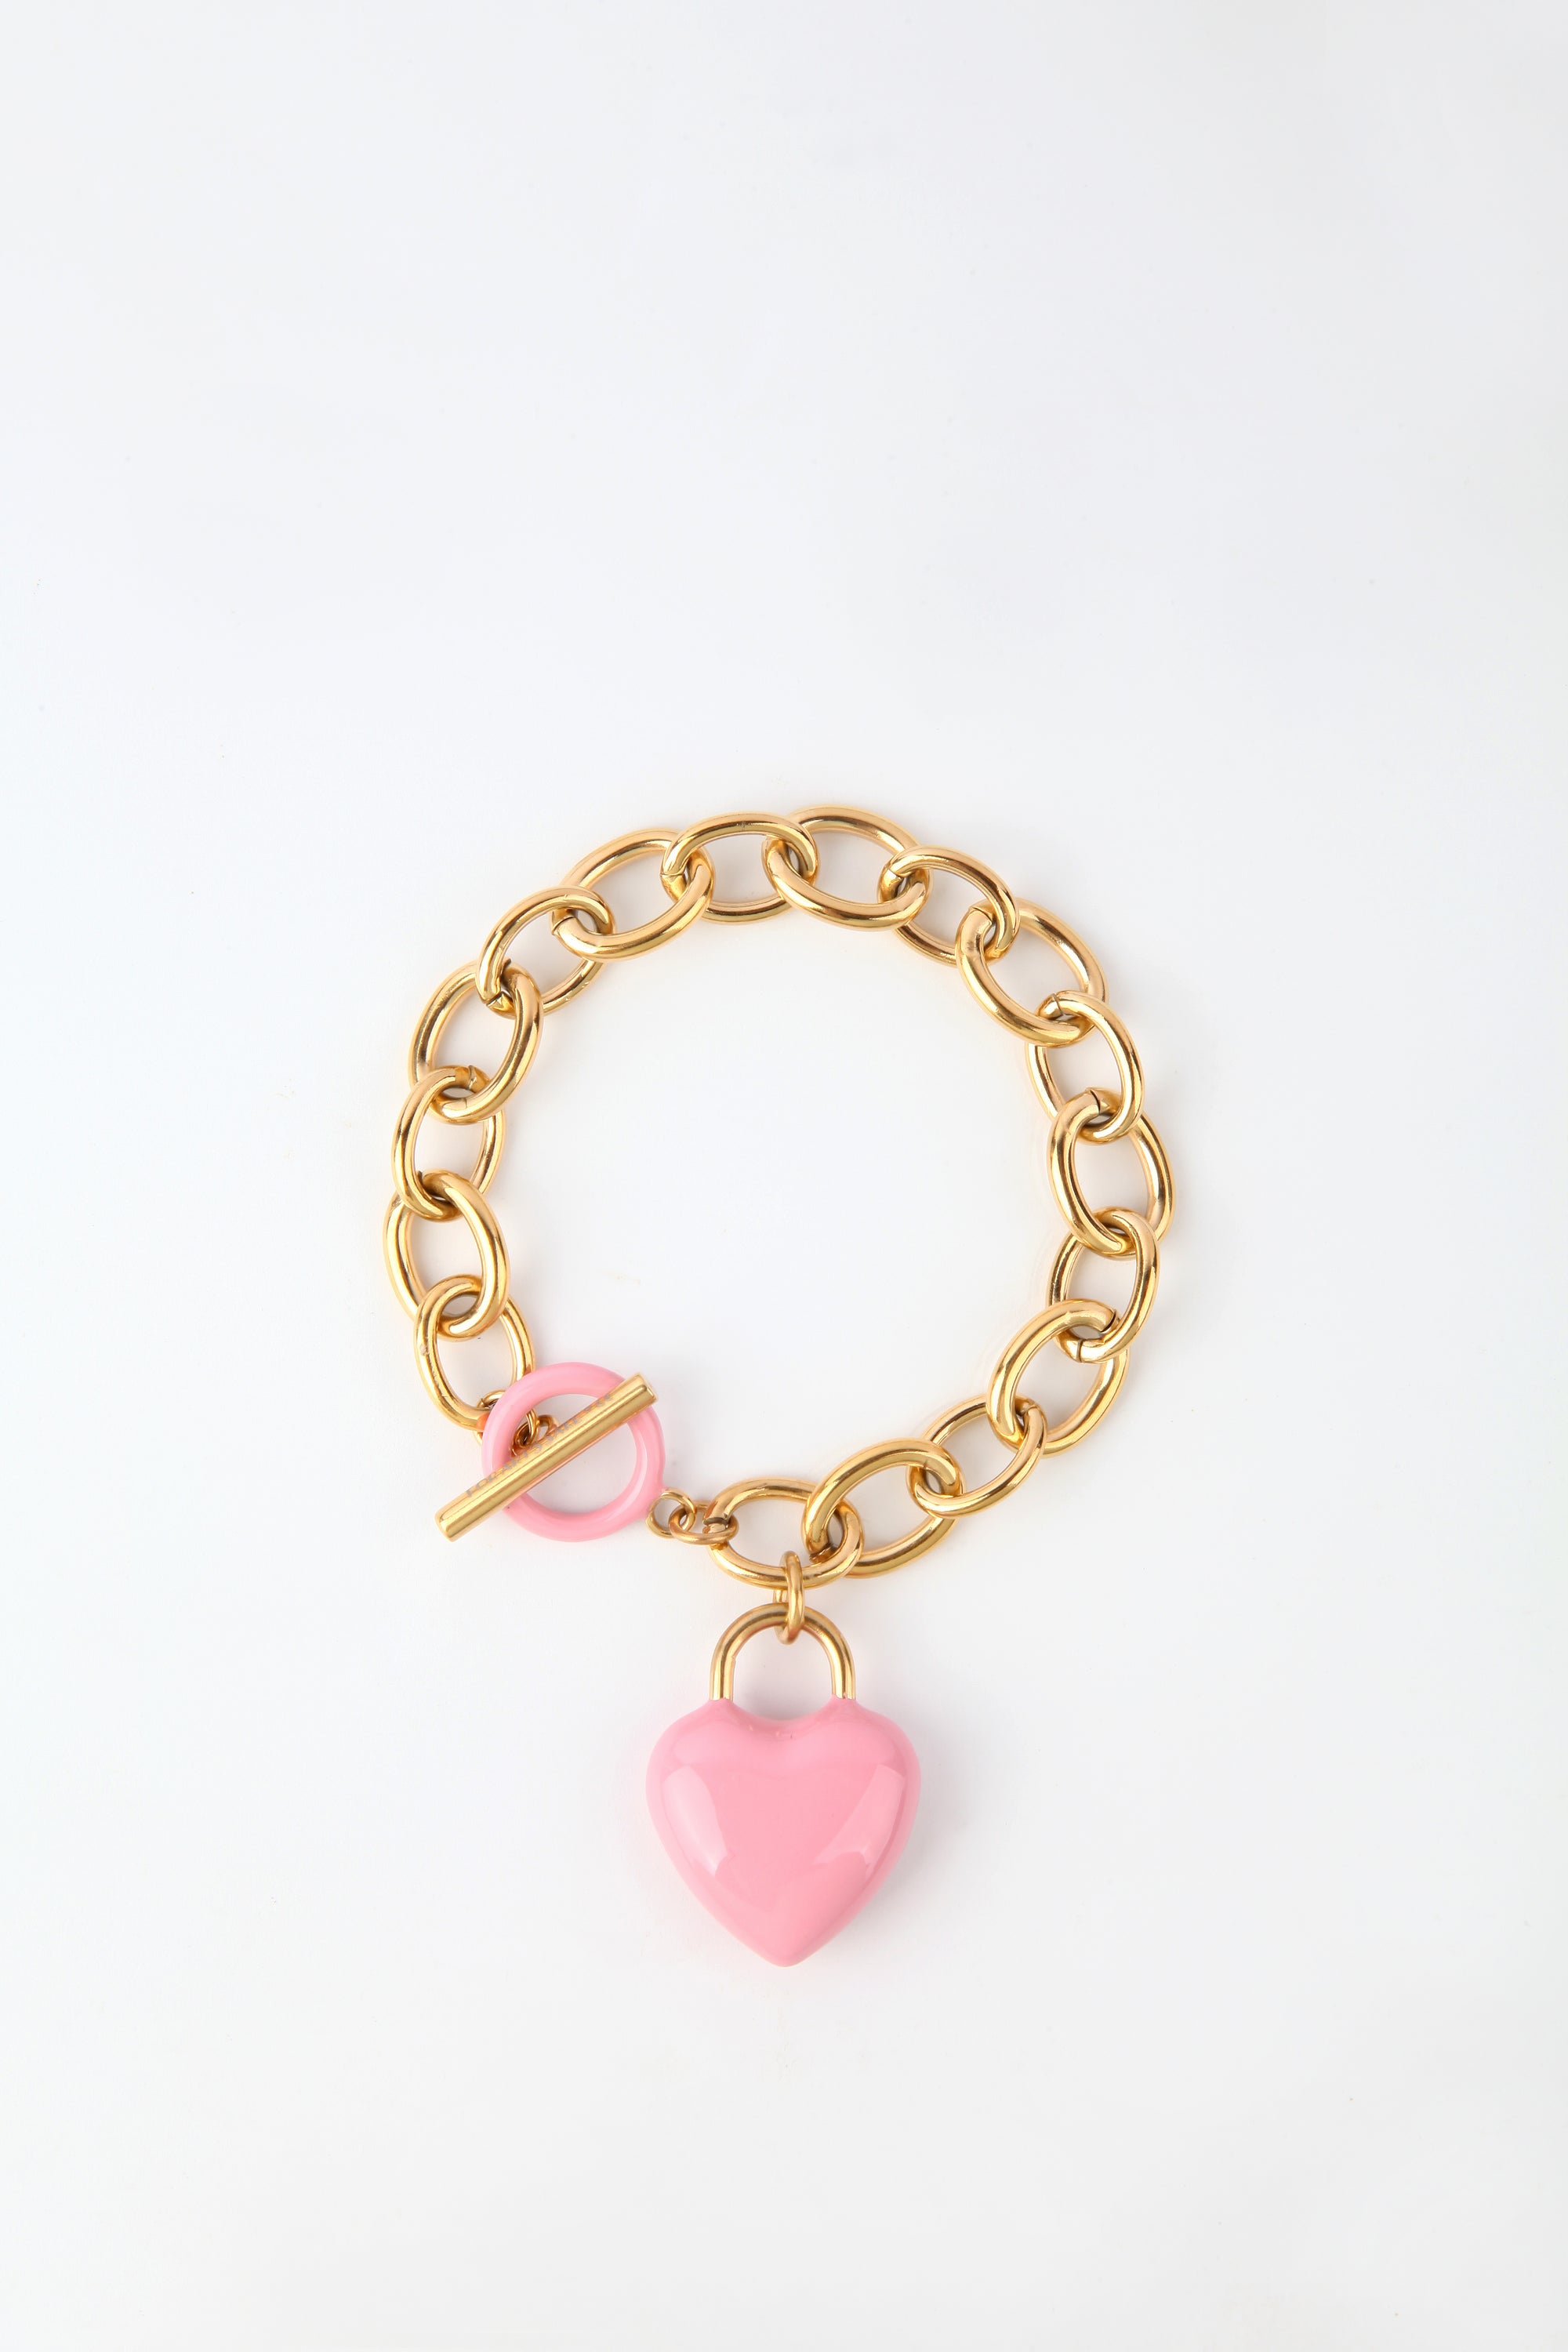 The Kiss Bracelet by For Art's Sake® is crafted with 18k gold, featuring a toggle clasp and an enamel-covered heart charm. The chain boasts large oval links, while the glossy pink heart charm adds a touch of color to the elegant design. Displayed against a plain white background, this piece exudes sophistication.